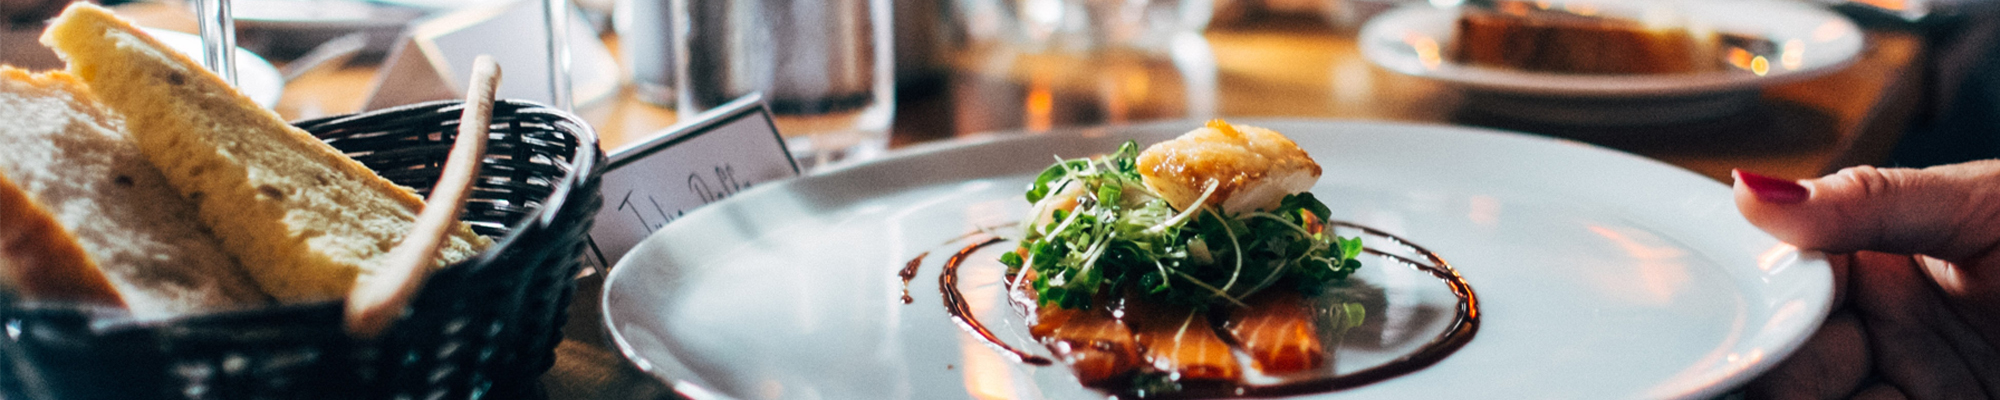 3 Big Changes in the Restaurant Industry to Keep an Eye On - Chef Works